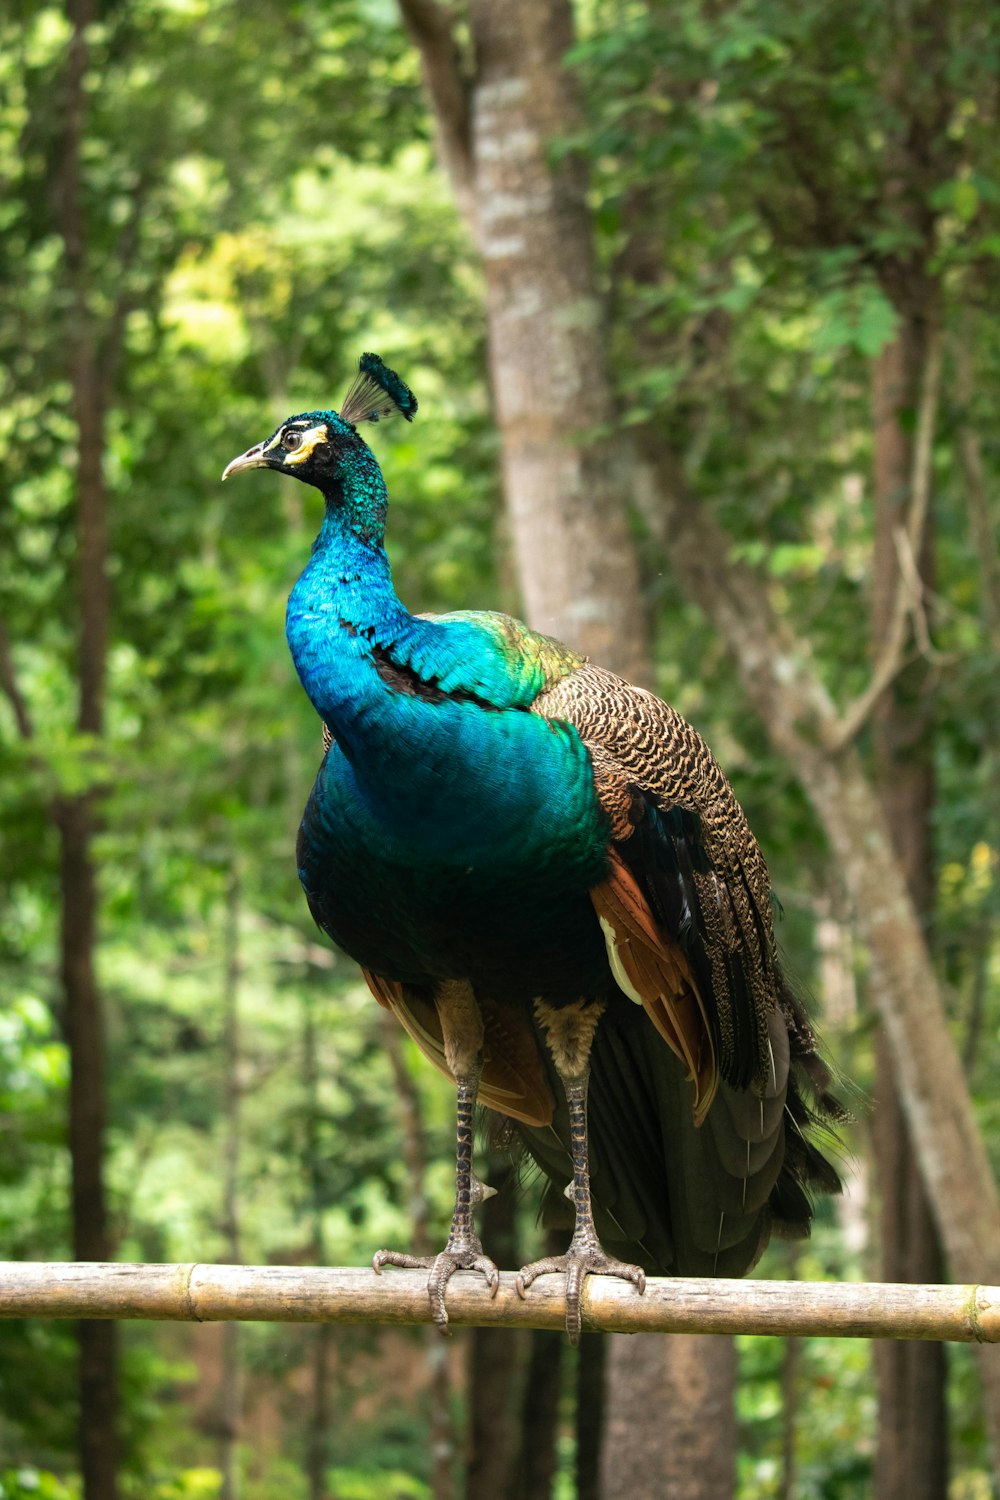 a peacock standing on top of a bamboo pole